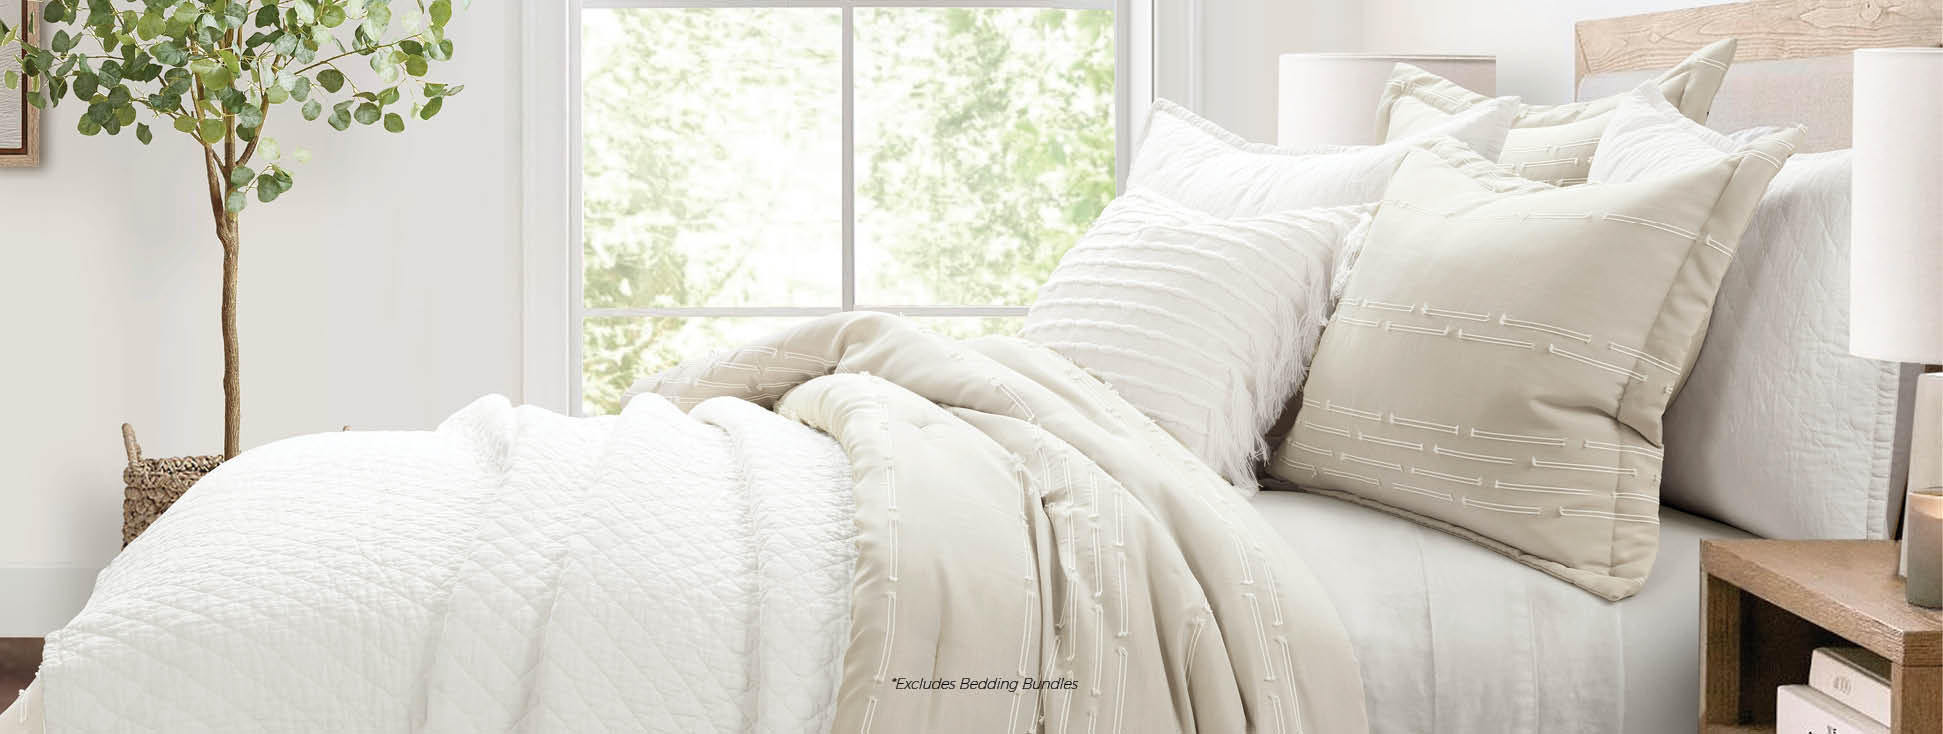 Take 25% off all bedding with code NEWBEDDING